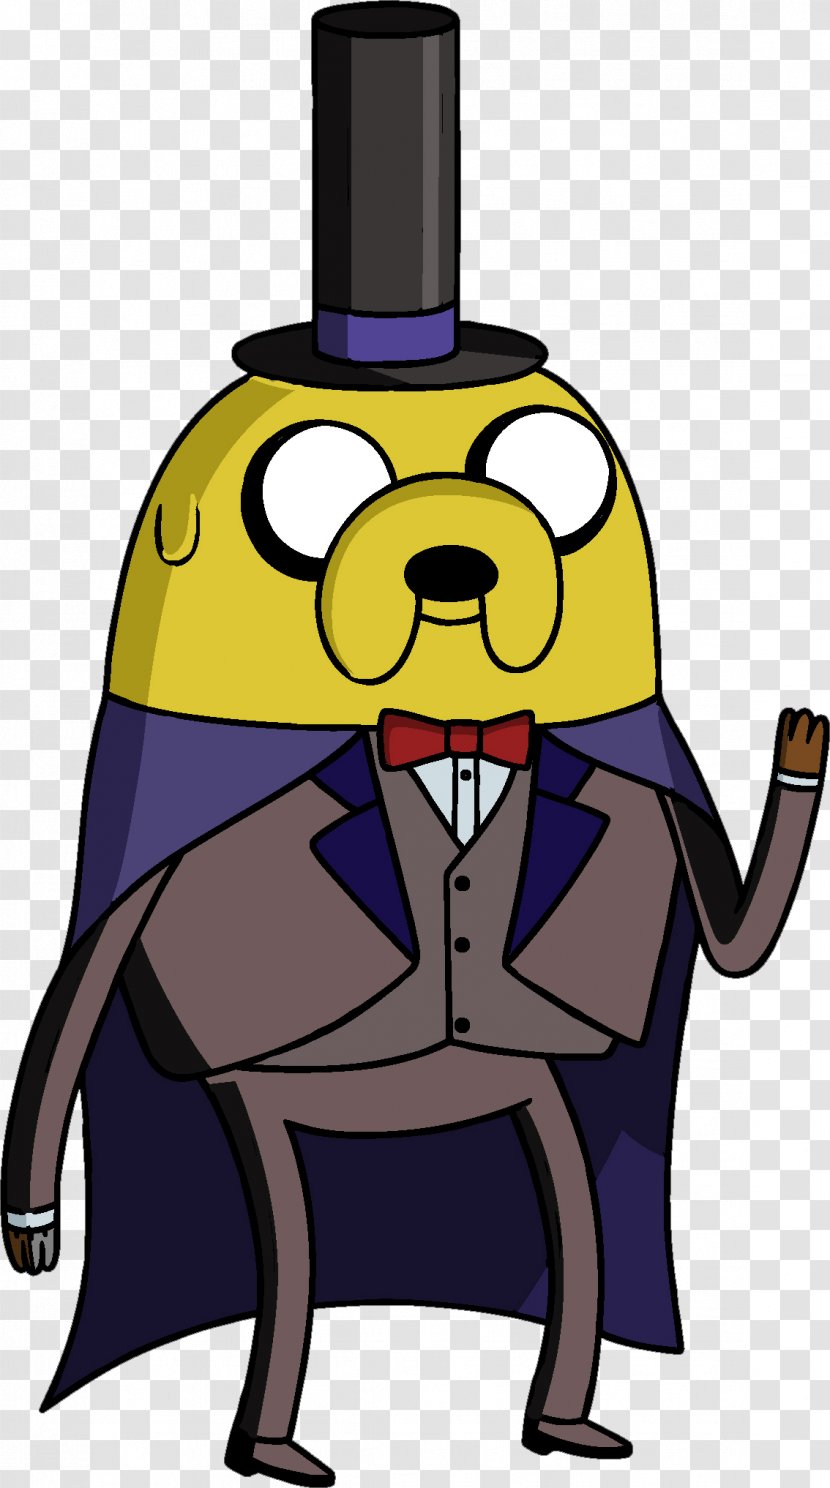 Jake The Dog Finn Human Marceline Vampire Queen Ice King Lumpy Space Princess - Adventure Time Transparent PNG